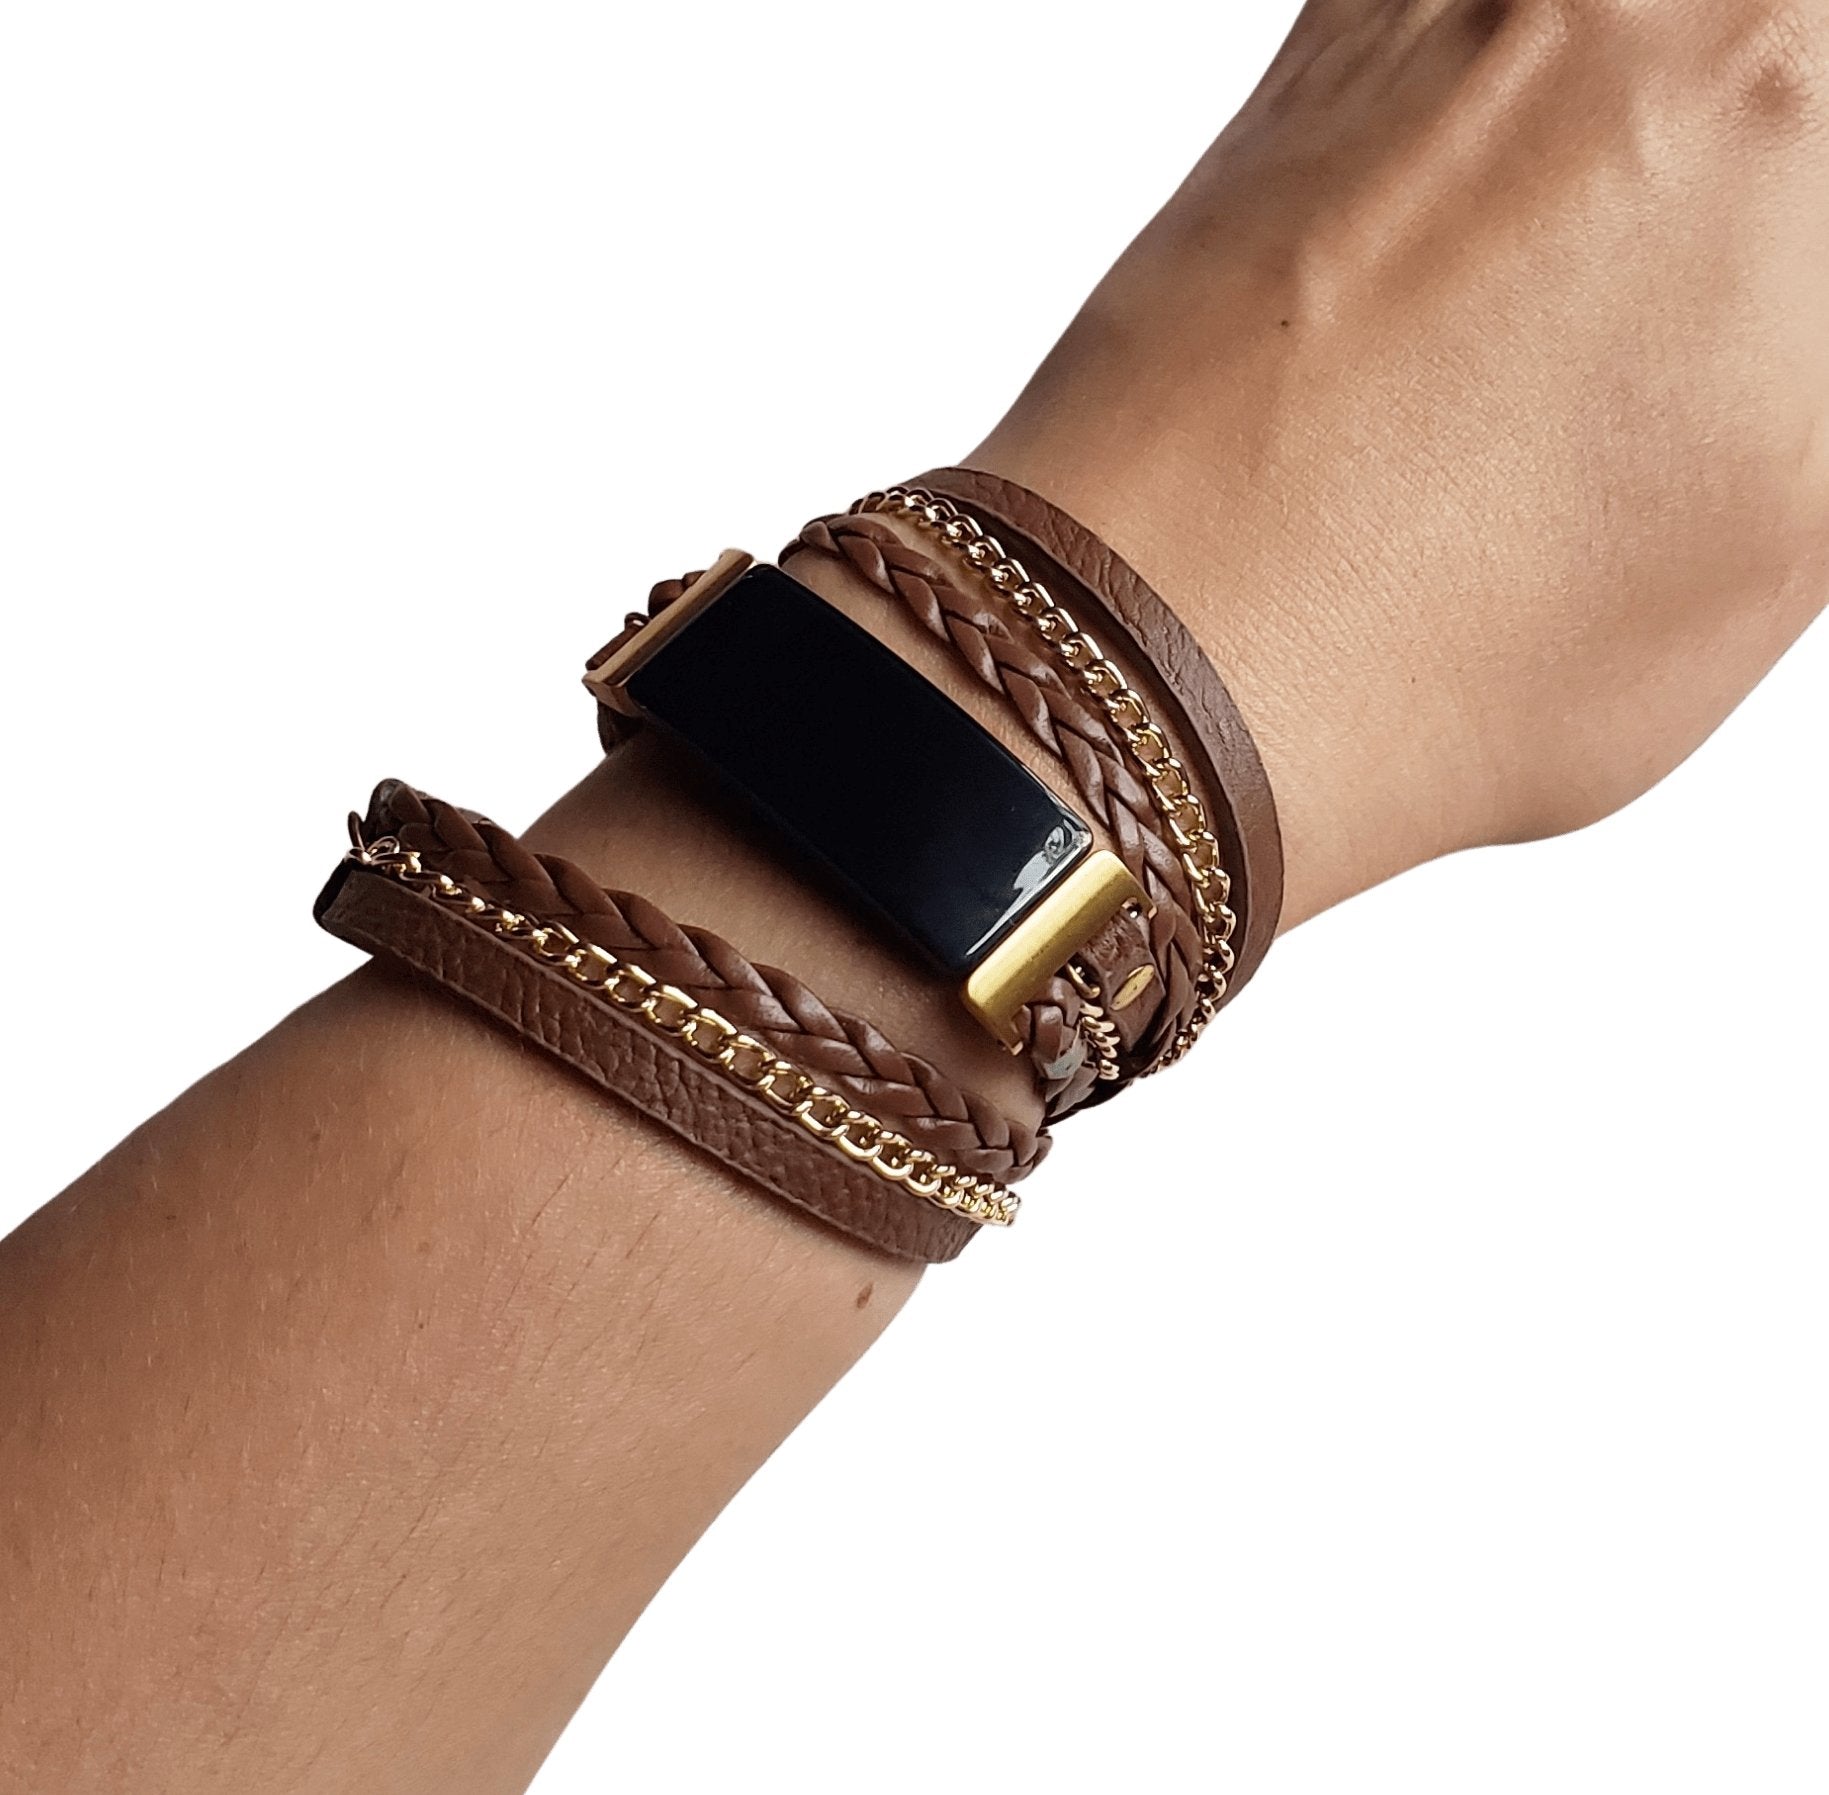 Black Vegan Leather Bracelet Gold Bangle with Lock Charm for Fitbit Luxe